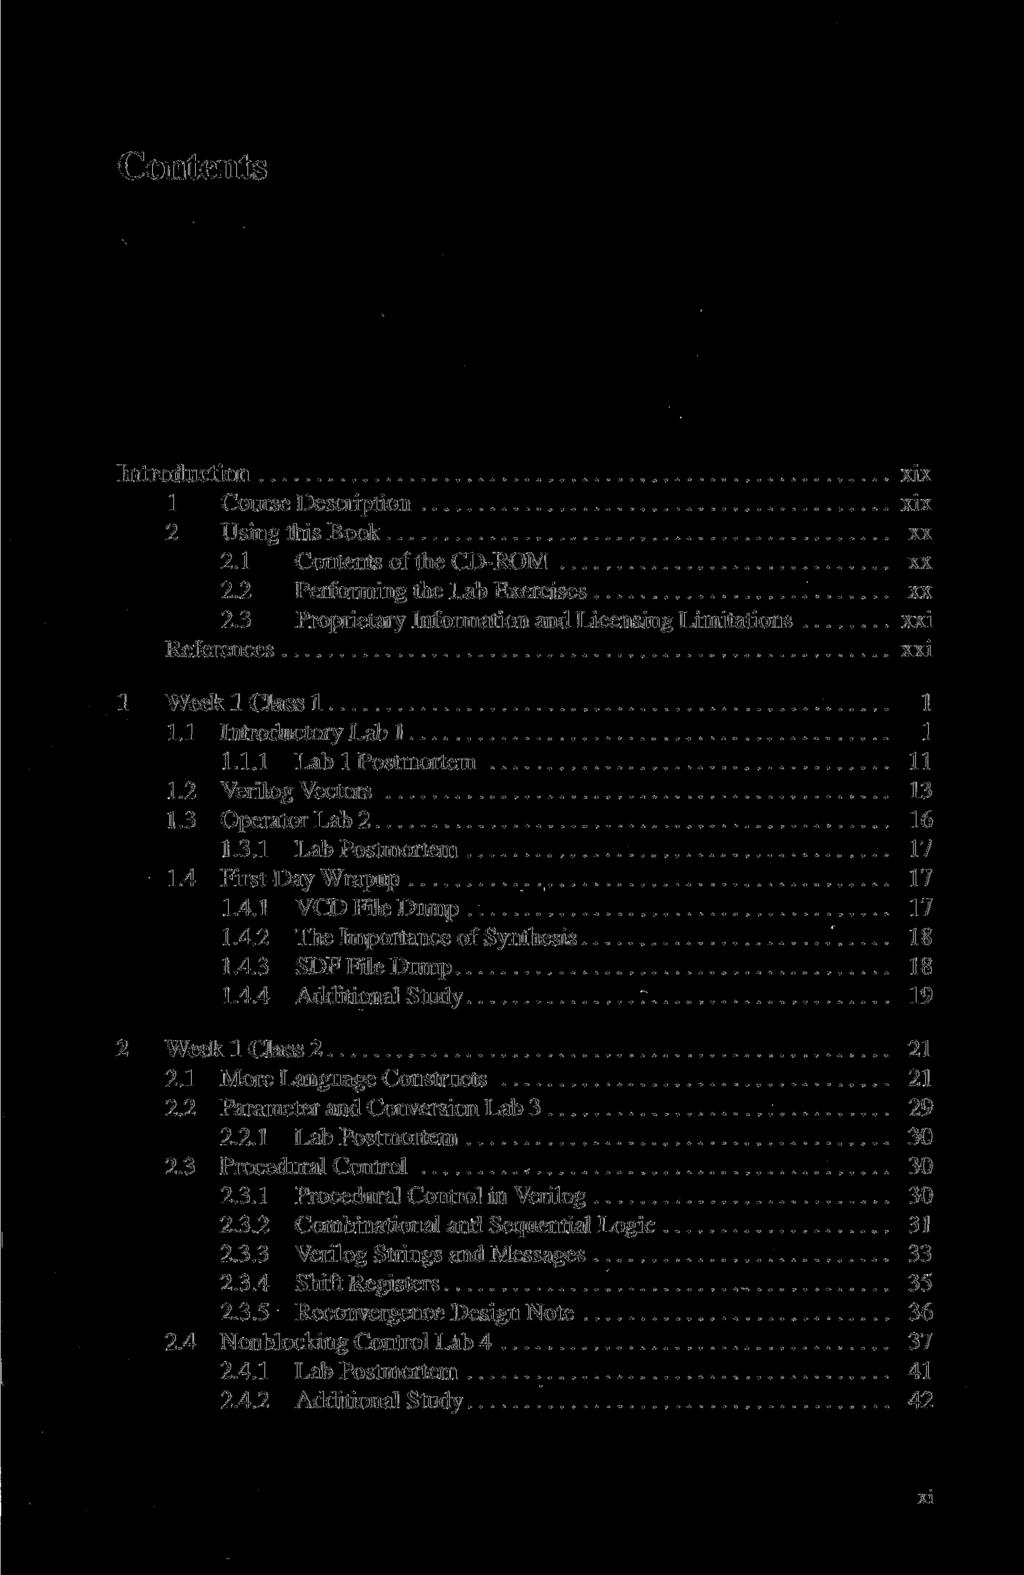 Contents Introduction xix 1 Course Description xix 2 Using this Book xx 2.1 Contents of the CD-ROM xx 2.2 Performing the Lab Exercises xx 2.